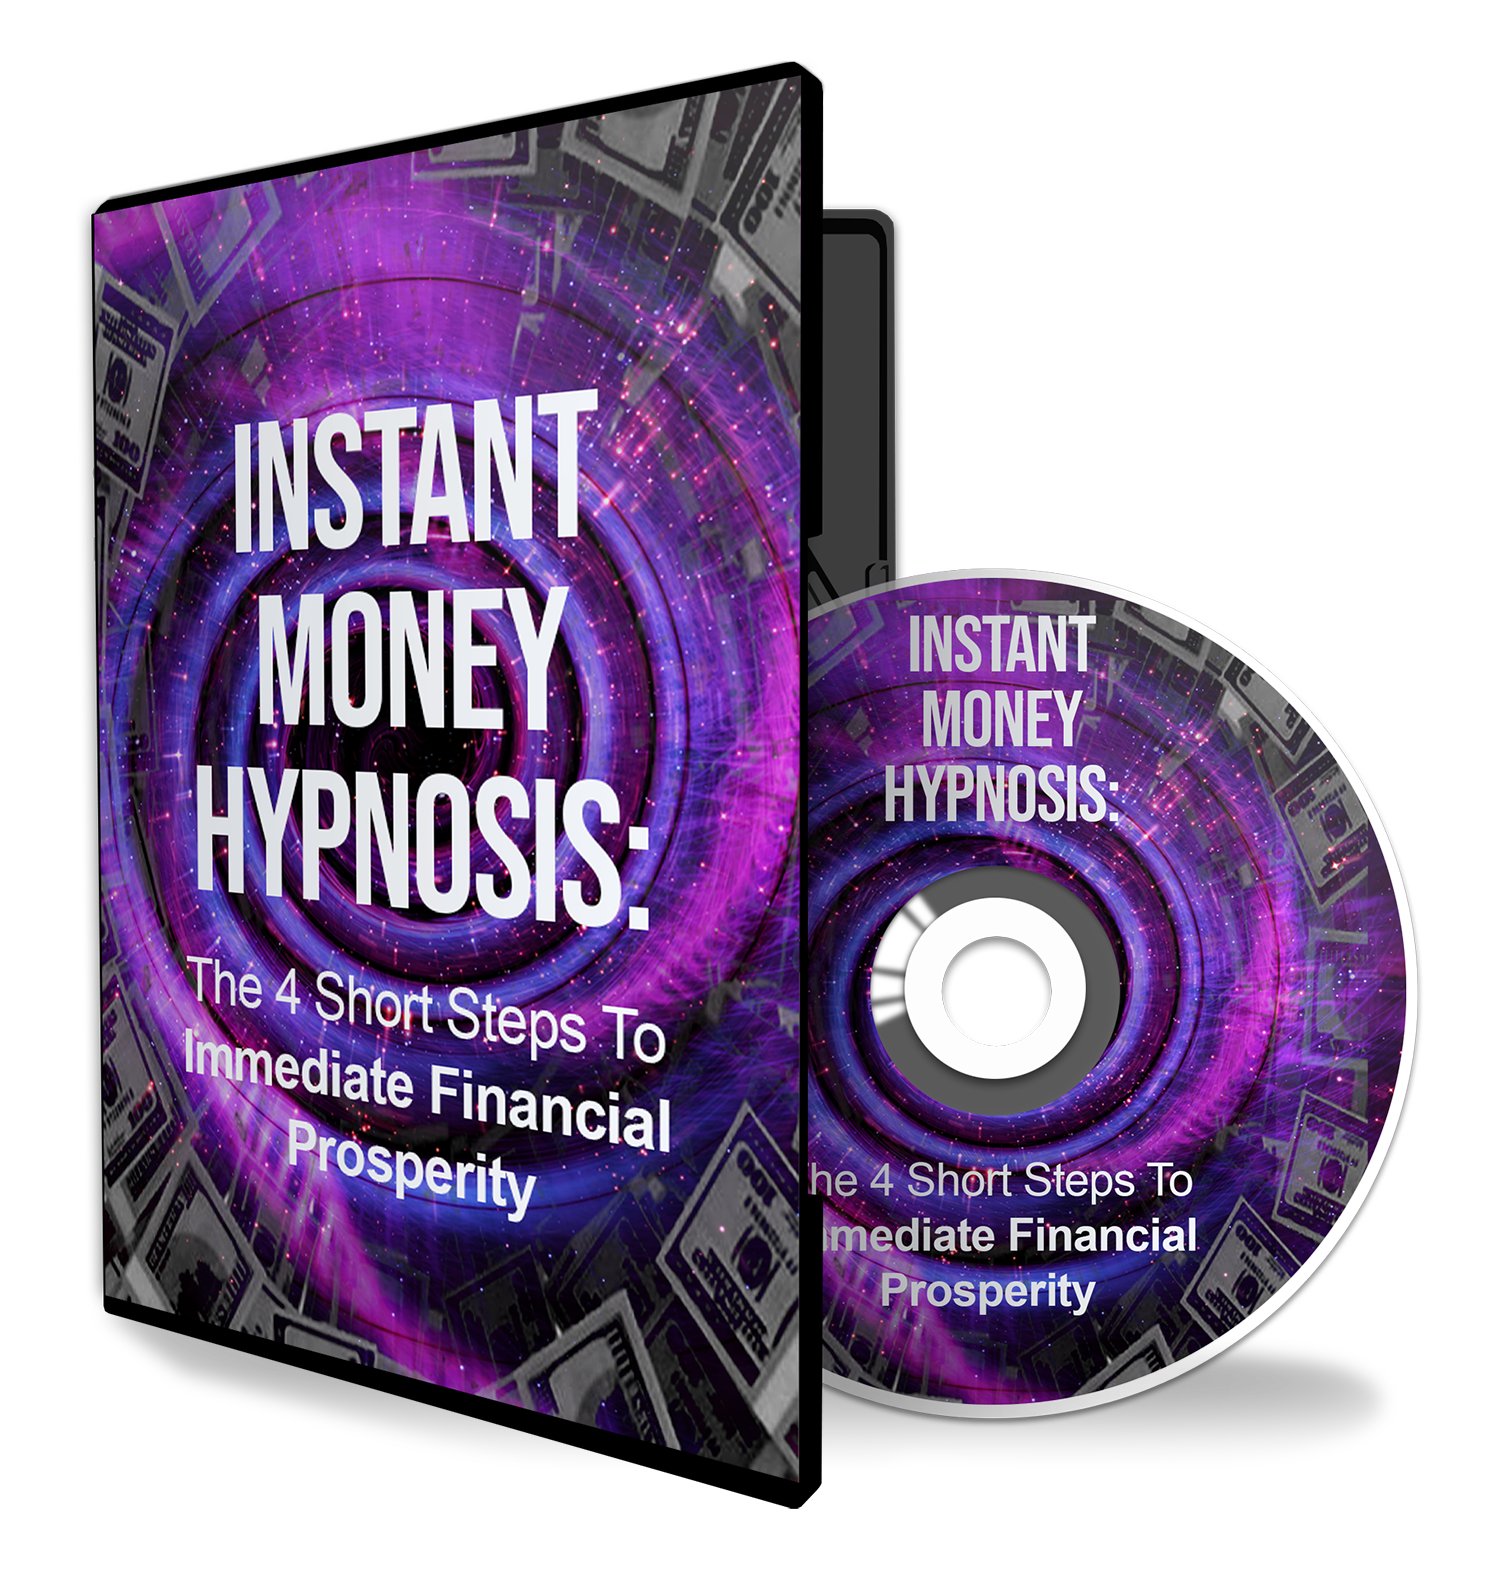 Instant Money Hypnosis Reviews